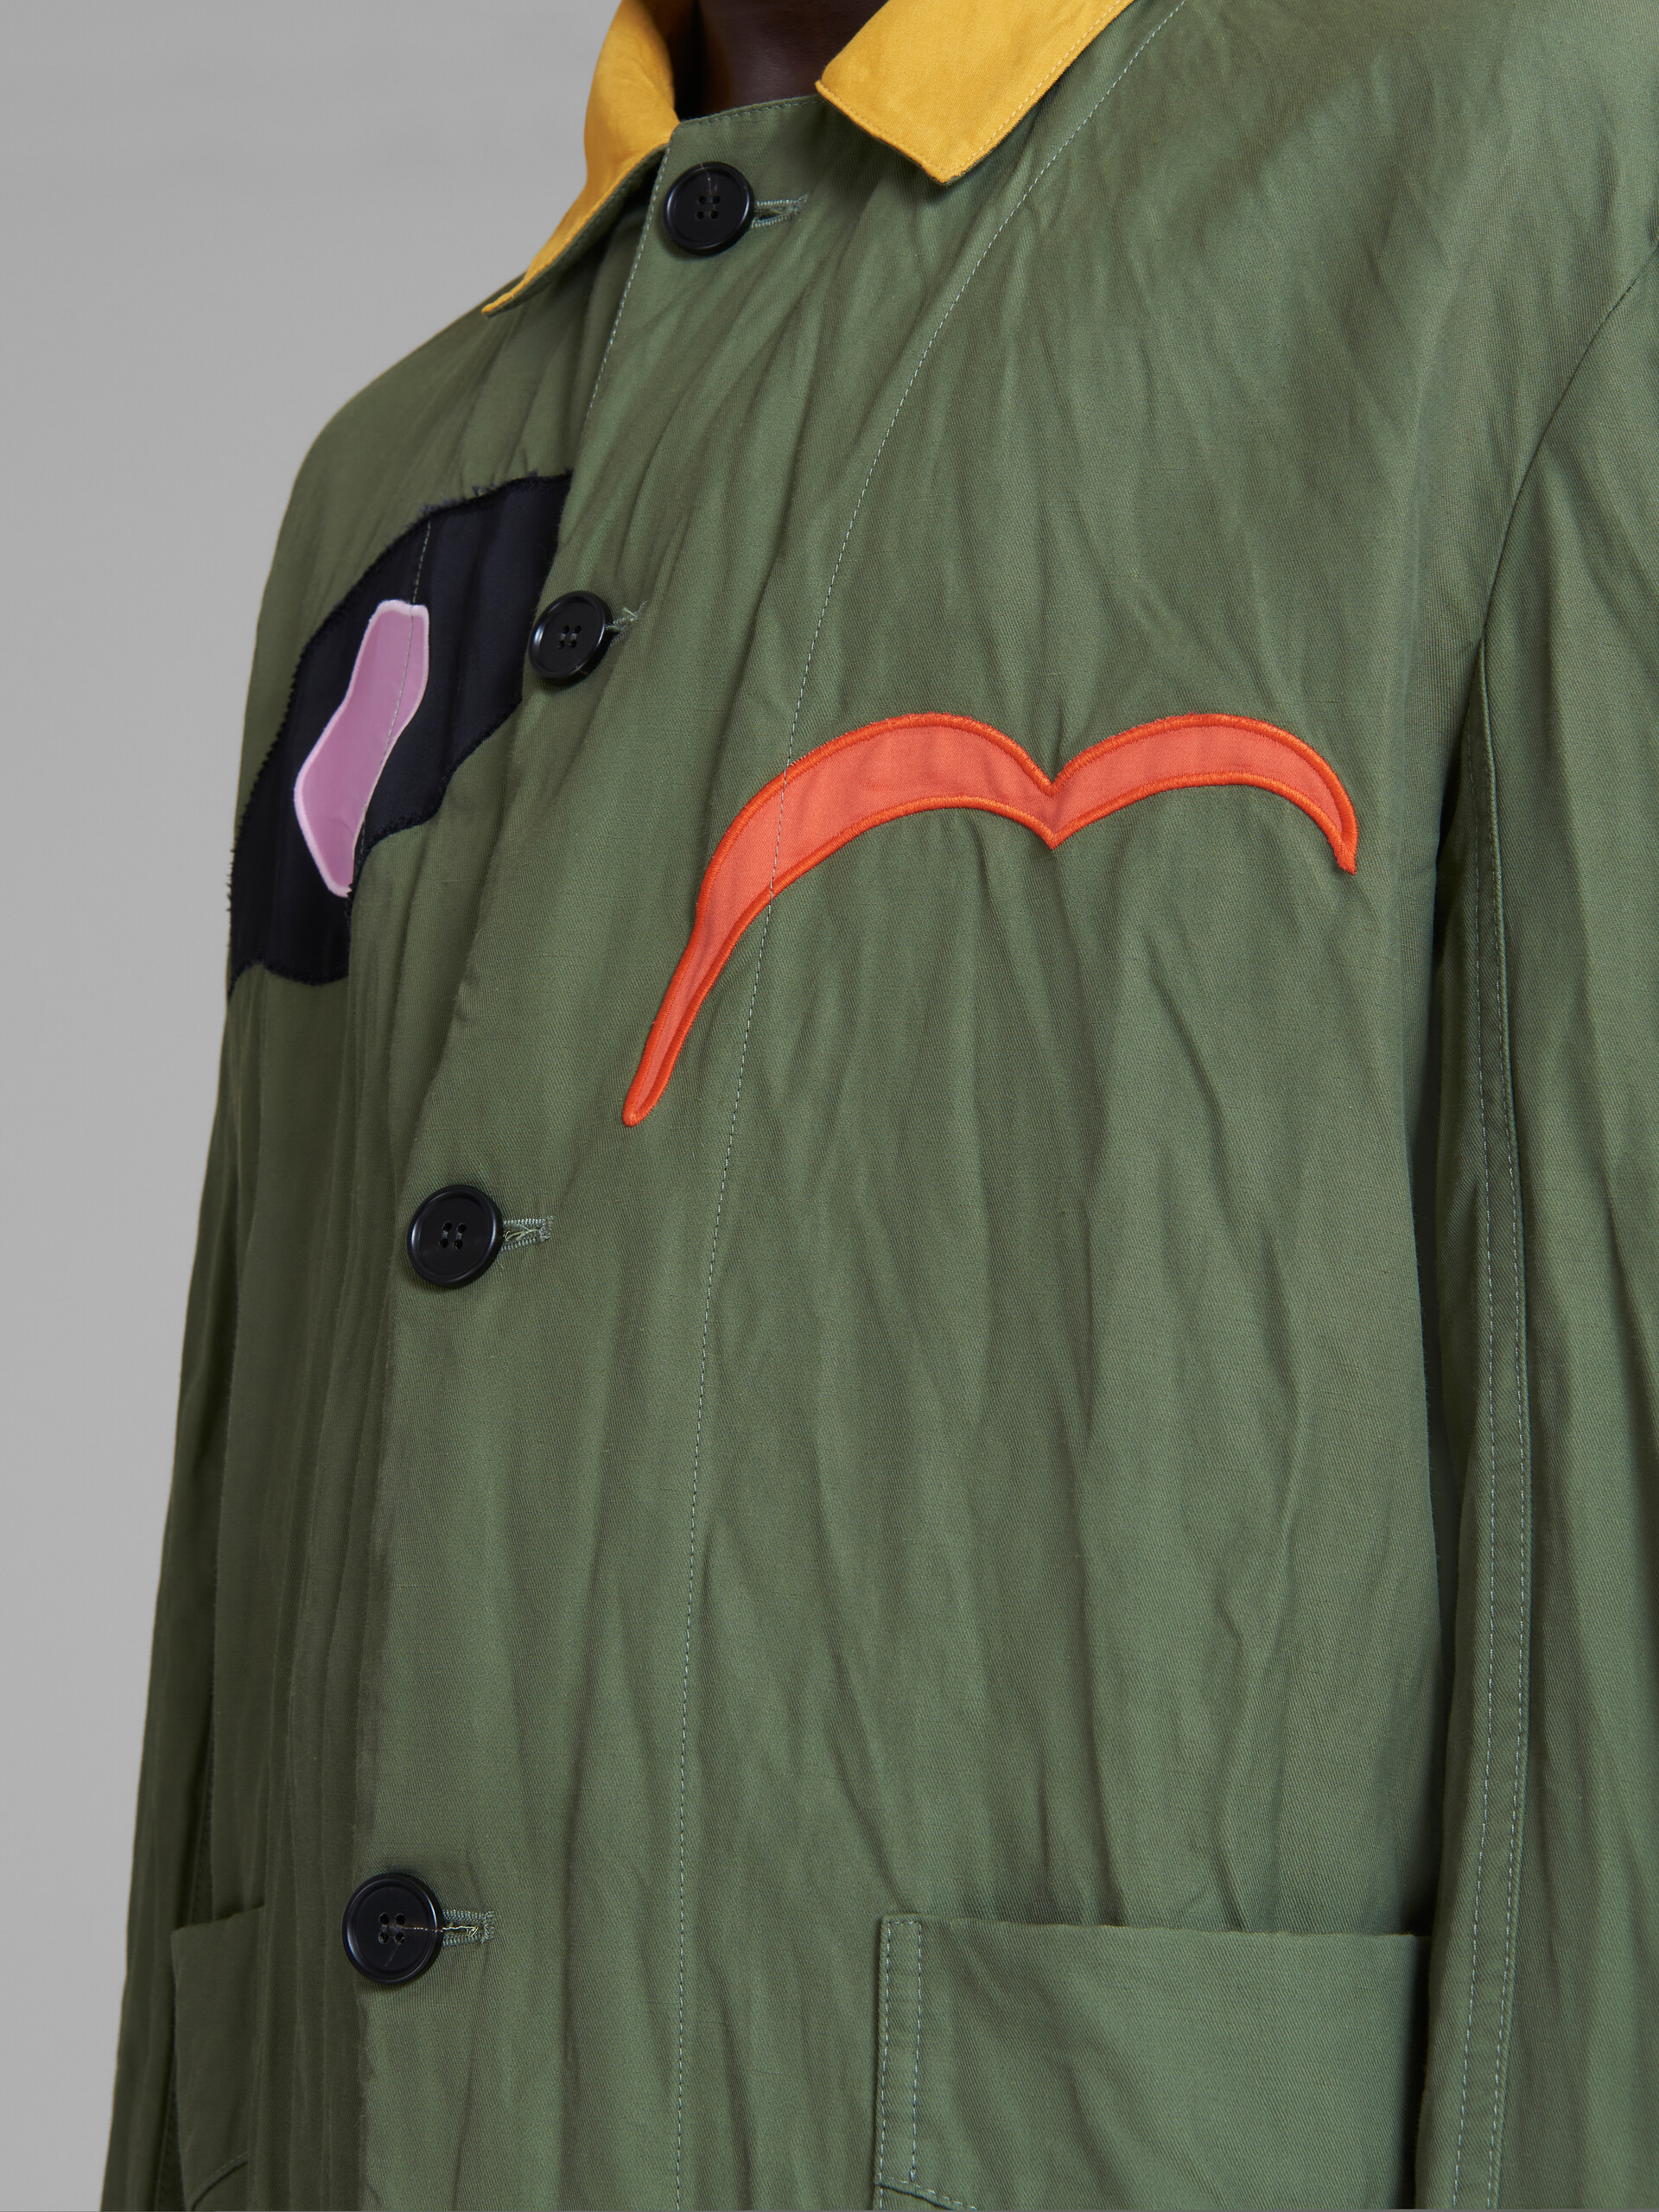 Marni x No Vacancy Inn - Green gabardine jacket with embroidered patches - Jackets - Image 5